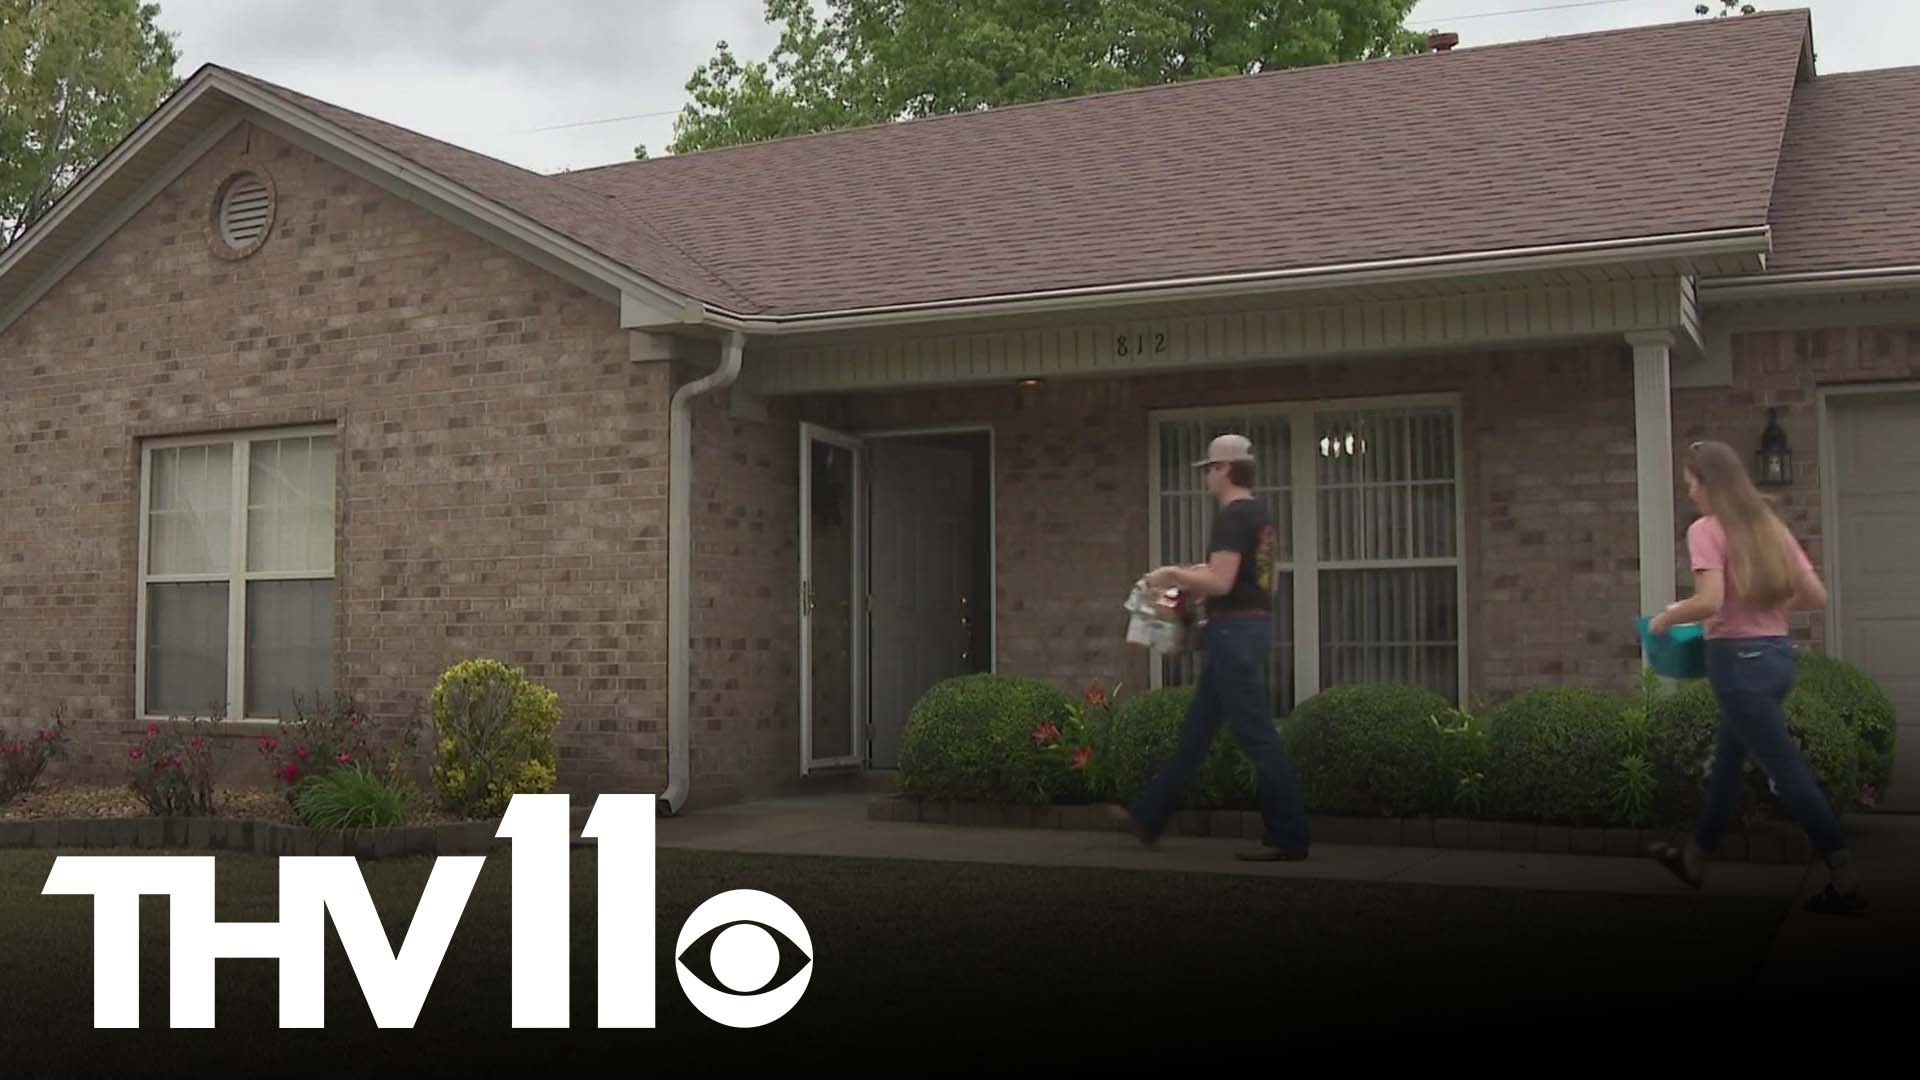 An Arkansas couple is getting ready to move into their new home after the March tornado tore apart the house that they lived in for over 20 years.